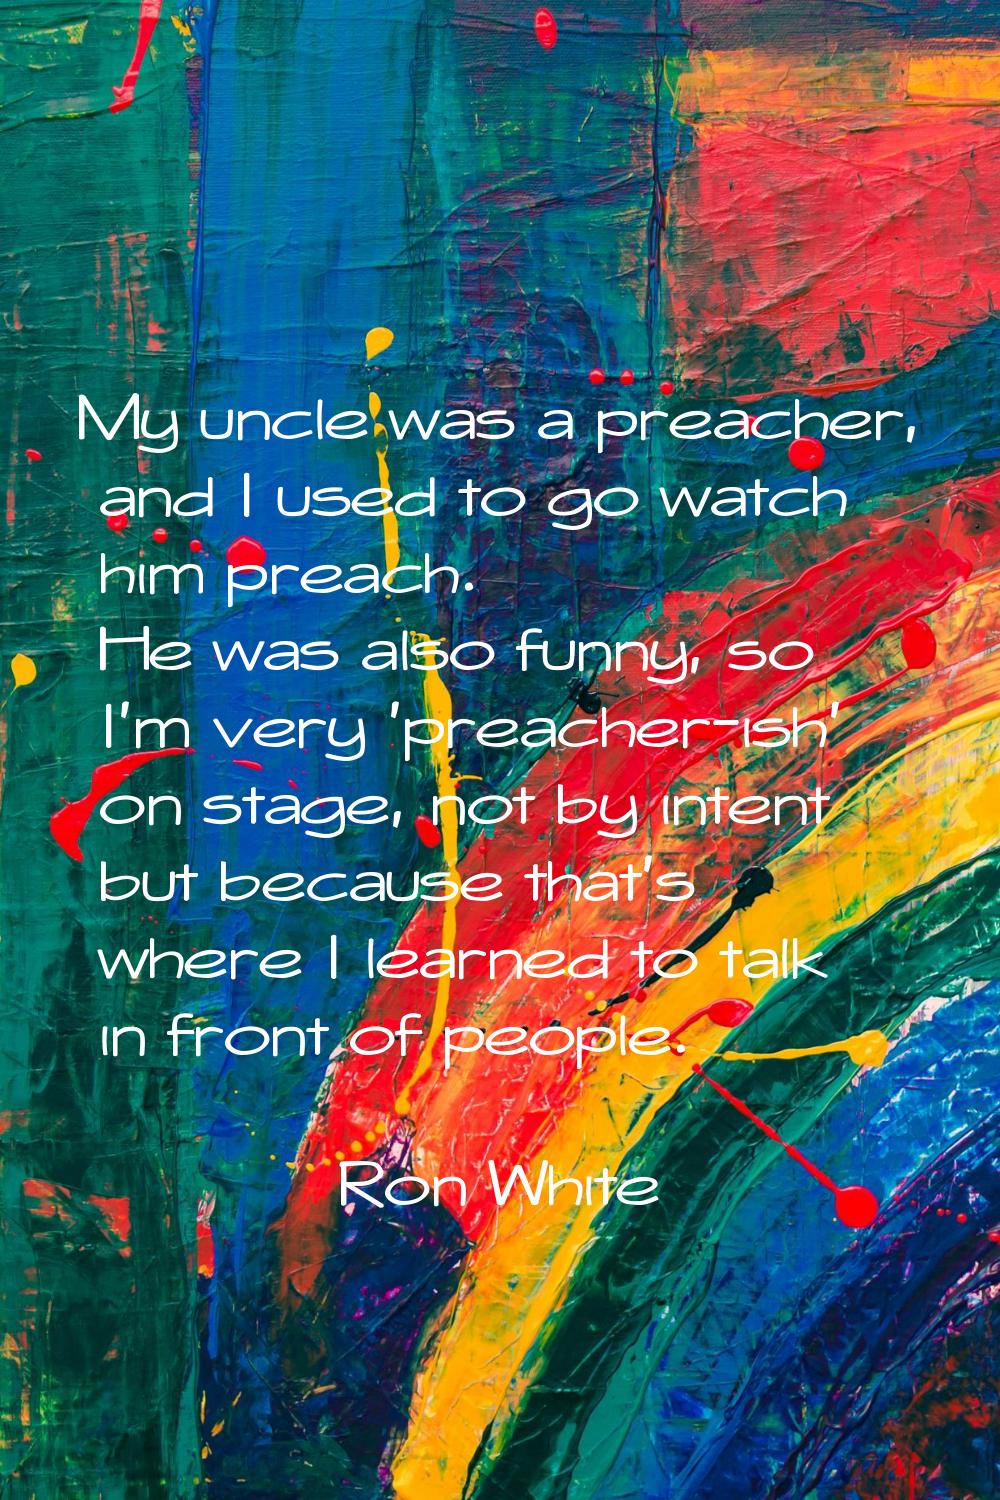 My uncle was a preacher, and I used to go watch him preach. He was also funny, so I'm very 'preache